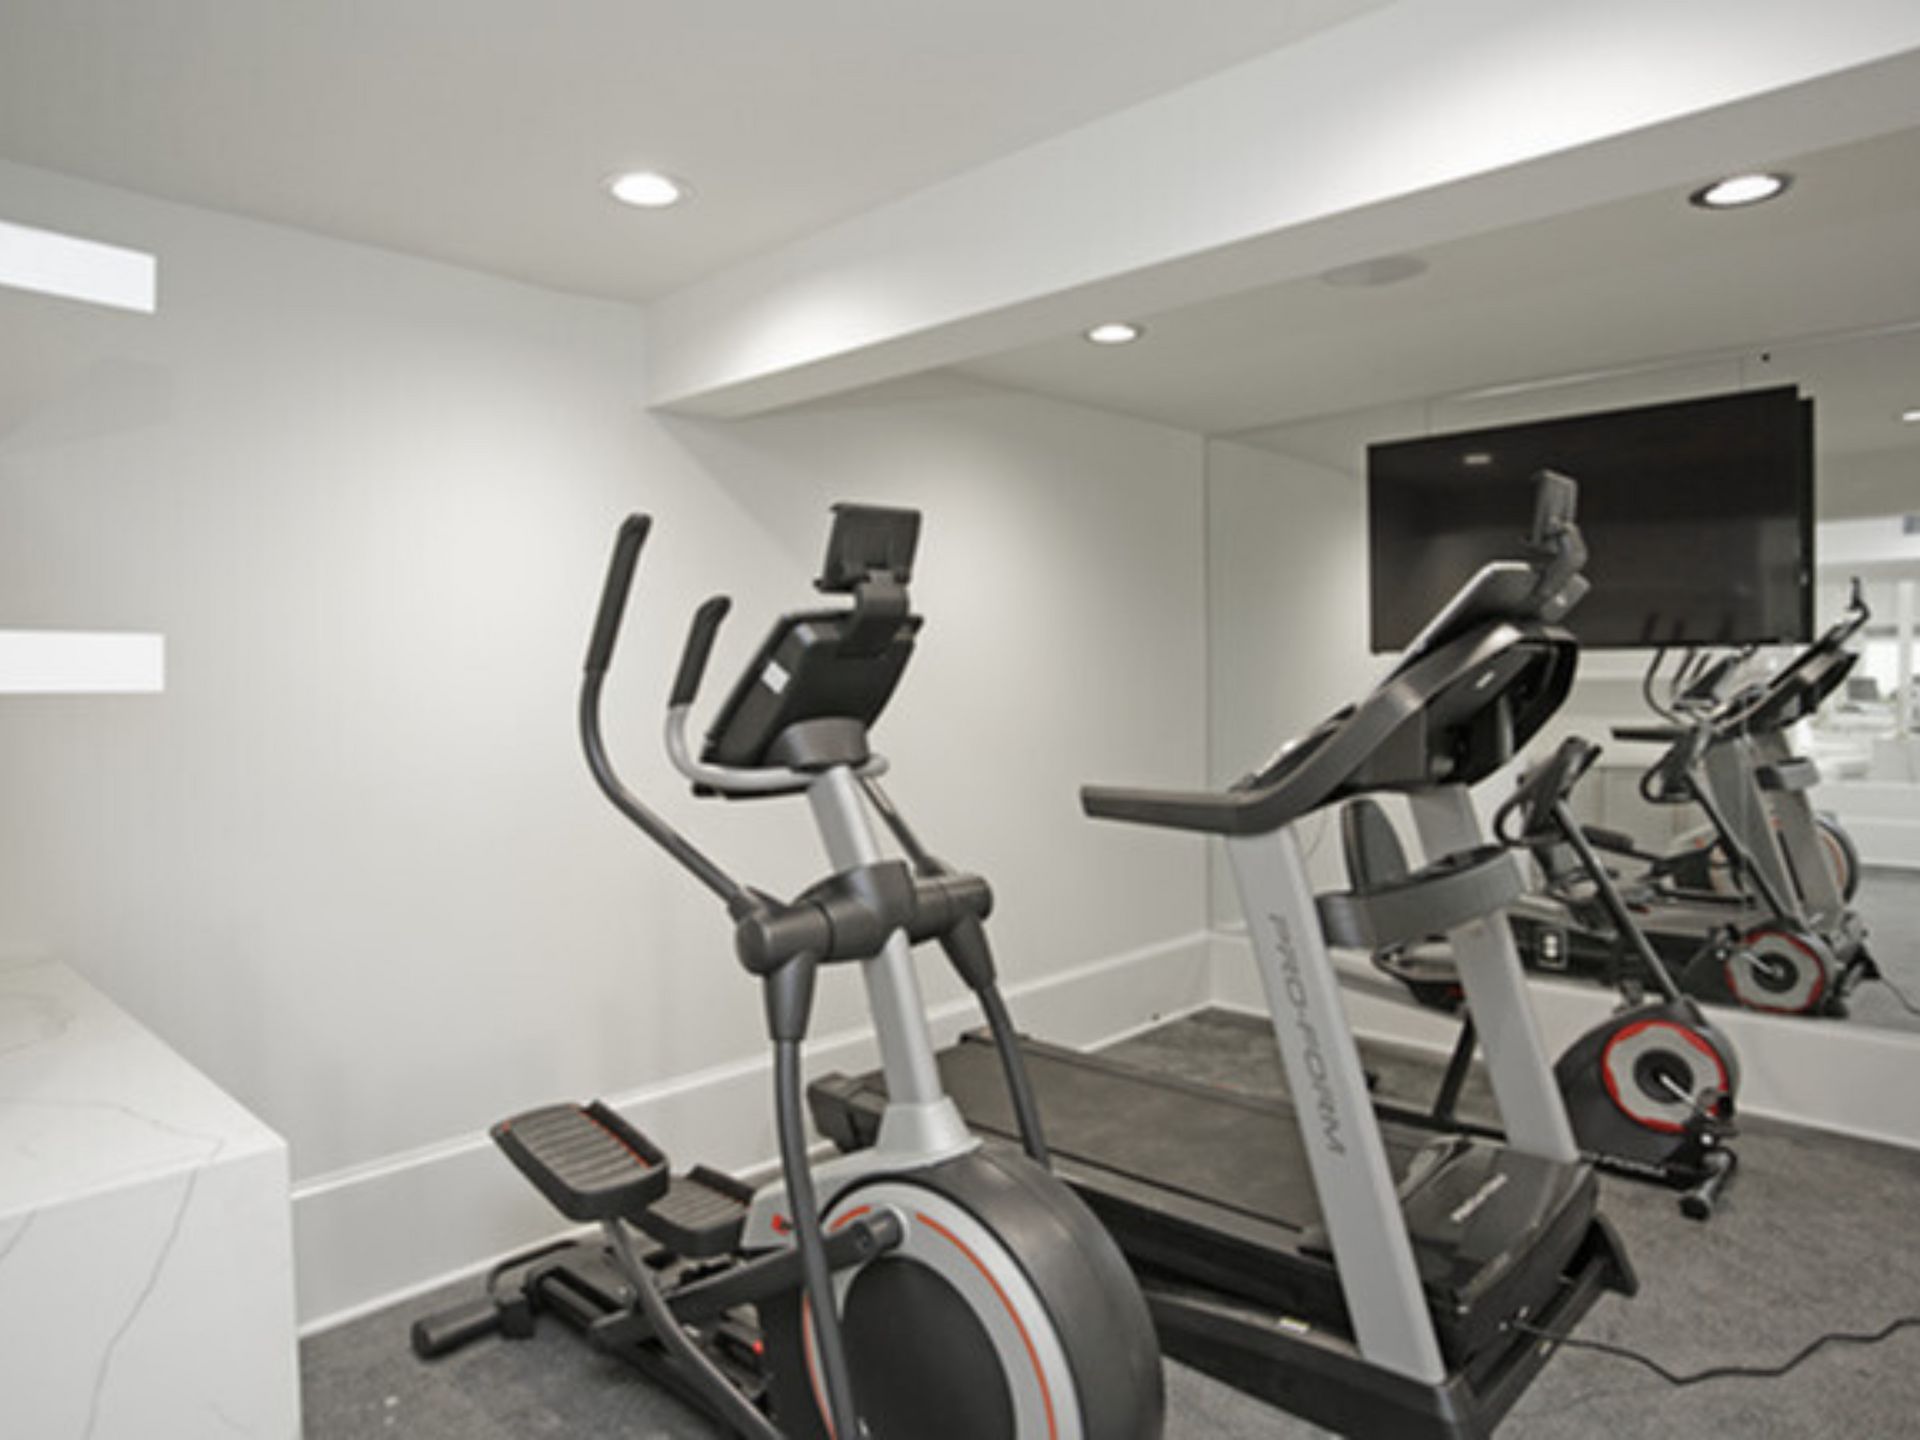 Overland Station apartment community newly remodeled fitness center with machines.